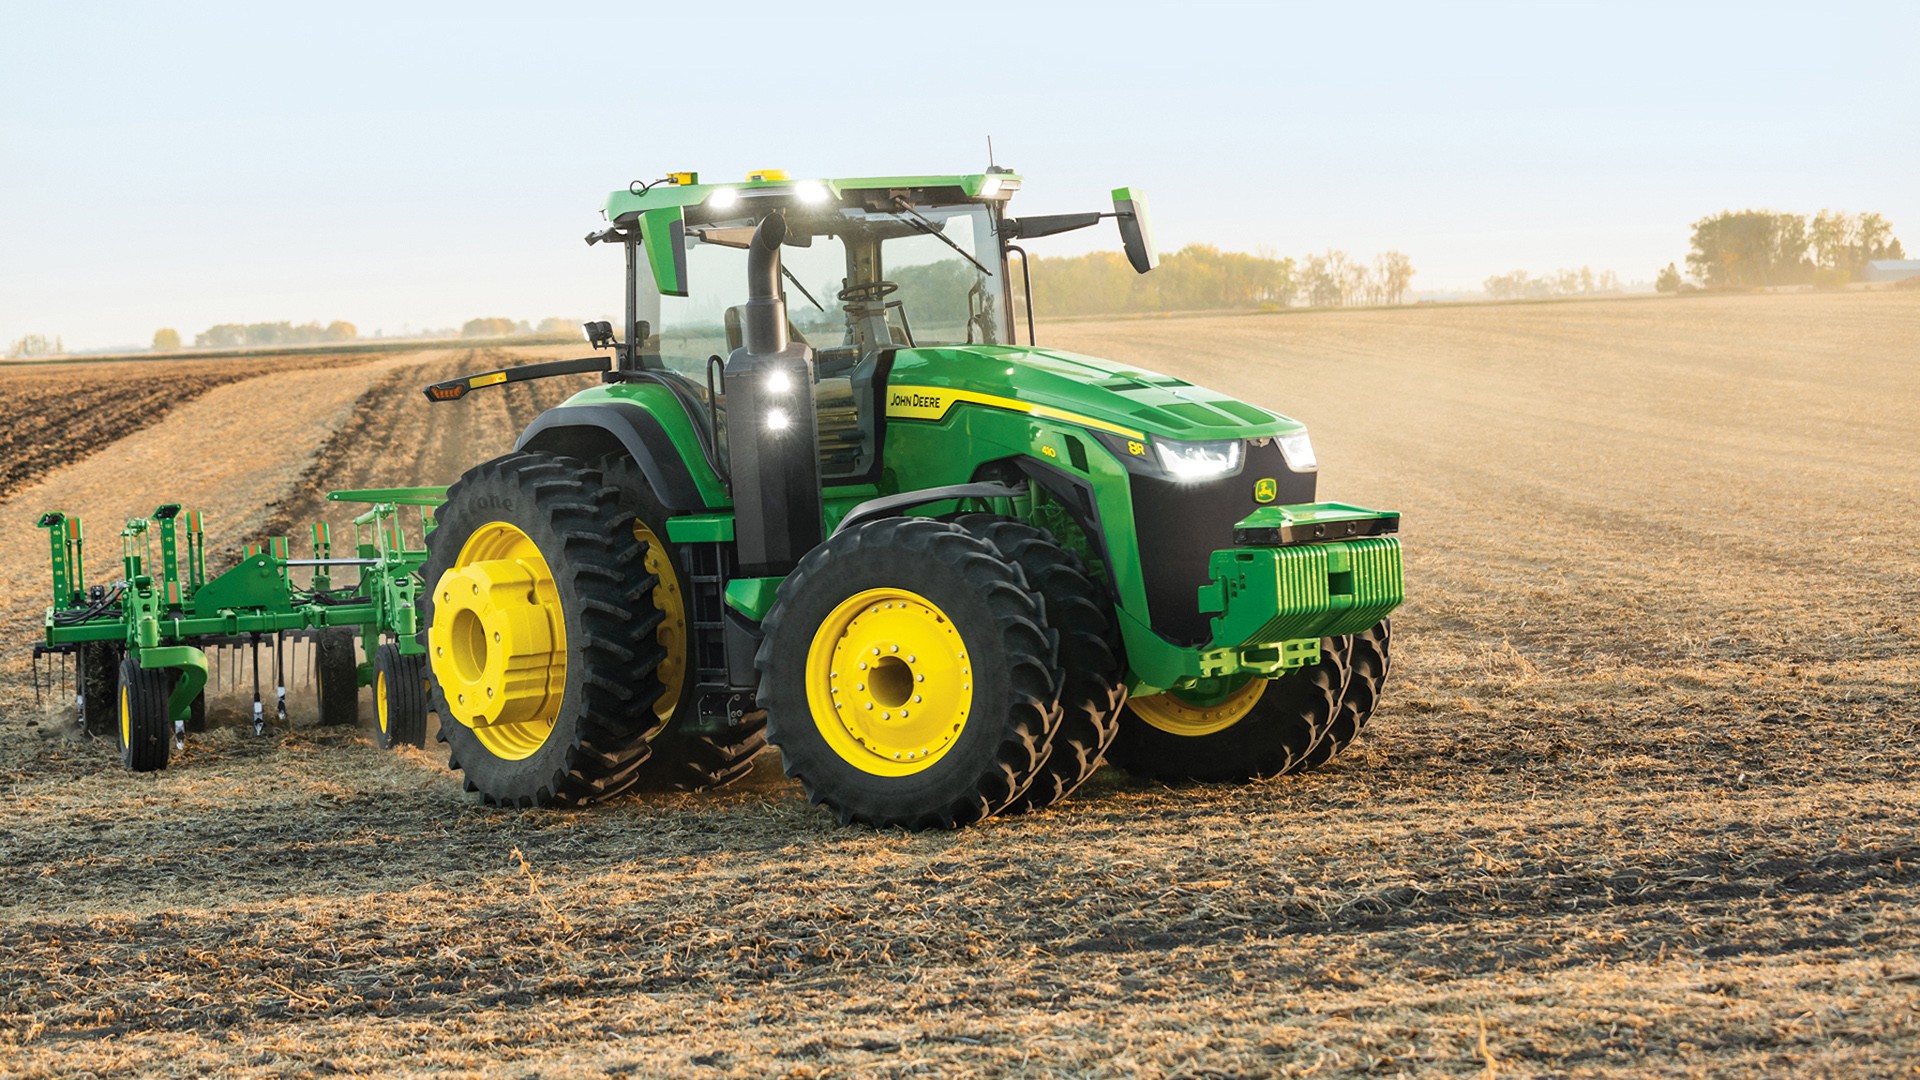 Farm Simulator IRL: Watch Us Control a John Deere Tractor With a Phone From  1,300 Miles Away